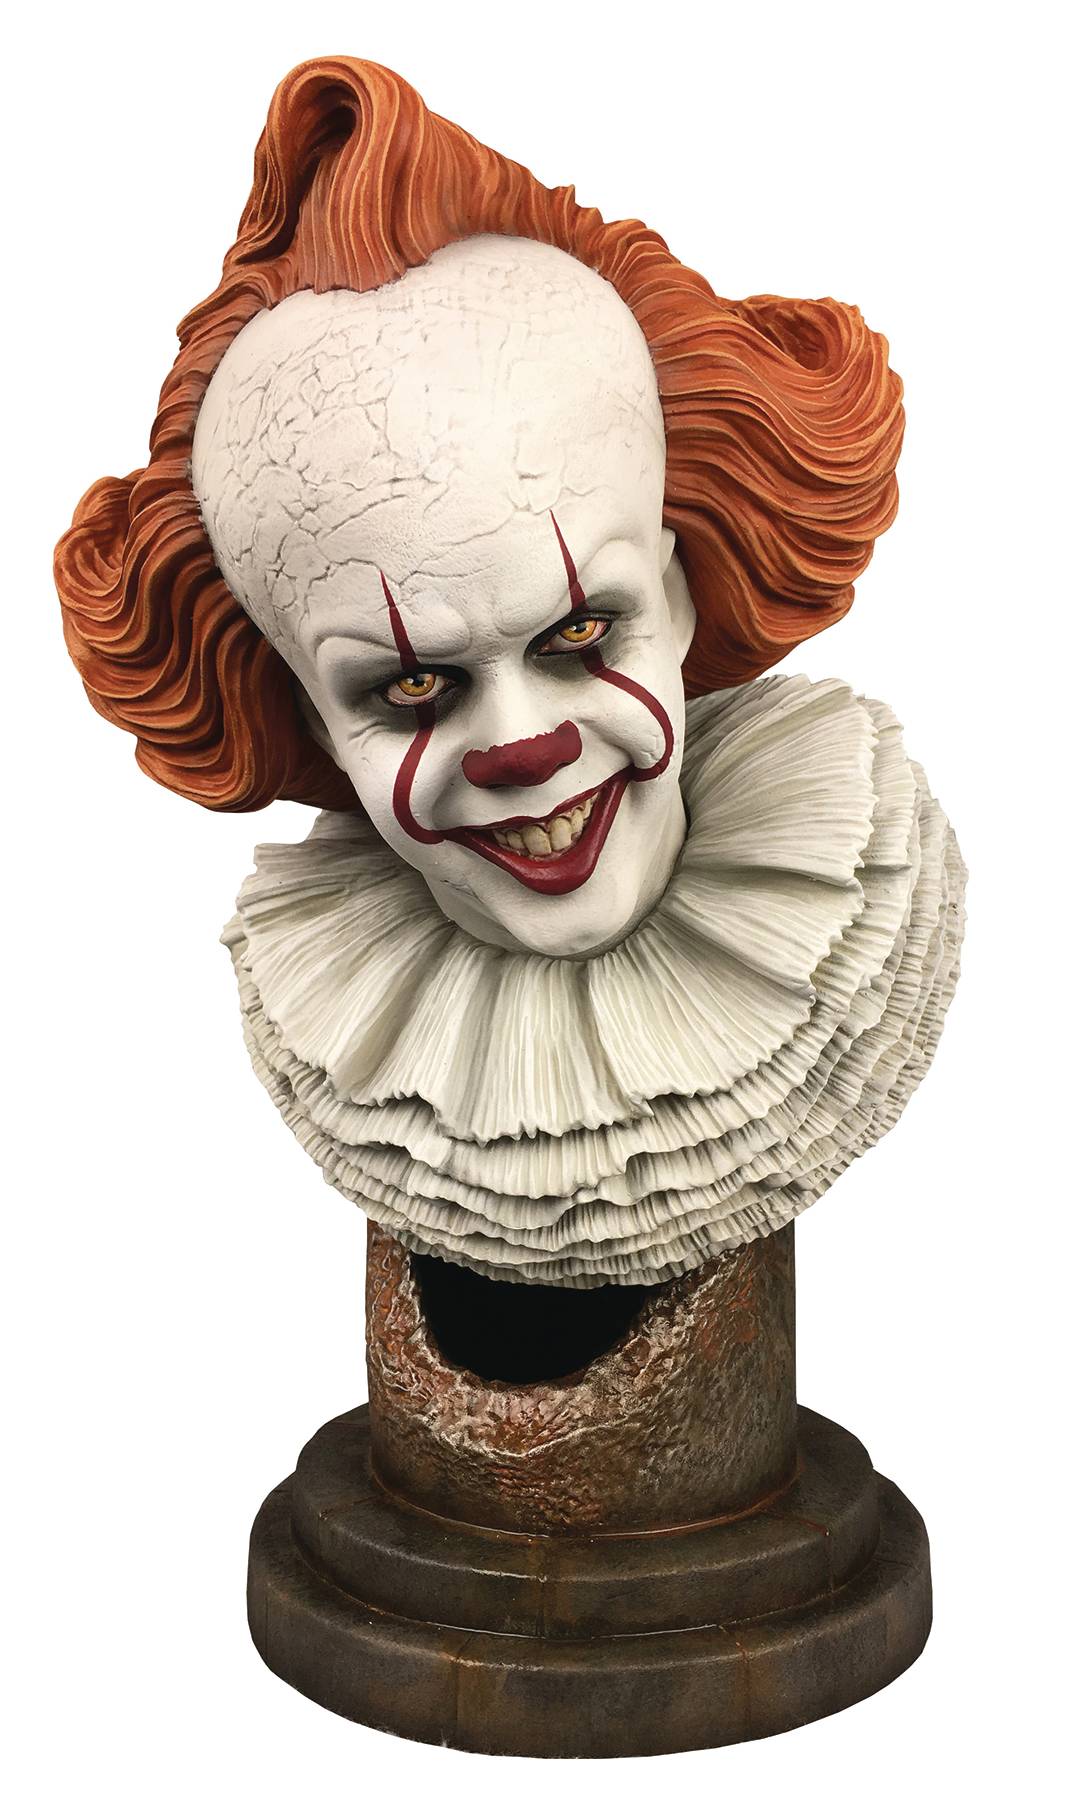 LEGENDS IN 3D MOVIE PENNYWISE 1/2 SCALE BUST